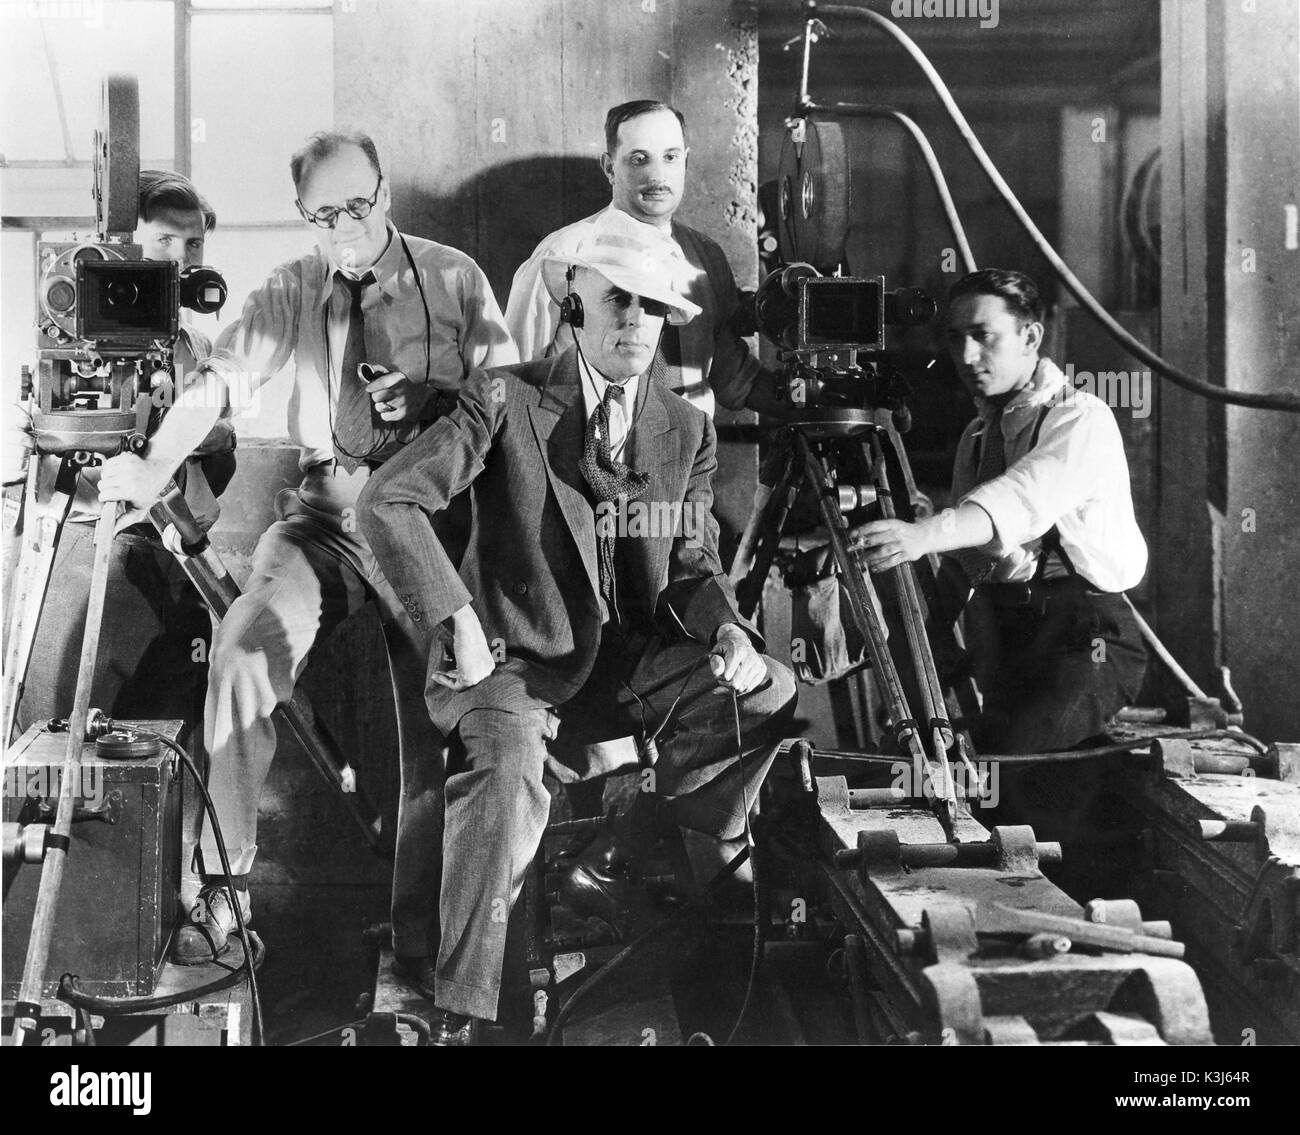 D. W. GRIFFITH Film Director D. W. GRIFFITH [centre] [1875 - 1948] Film Director Stock Photo